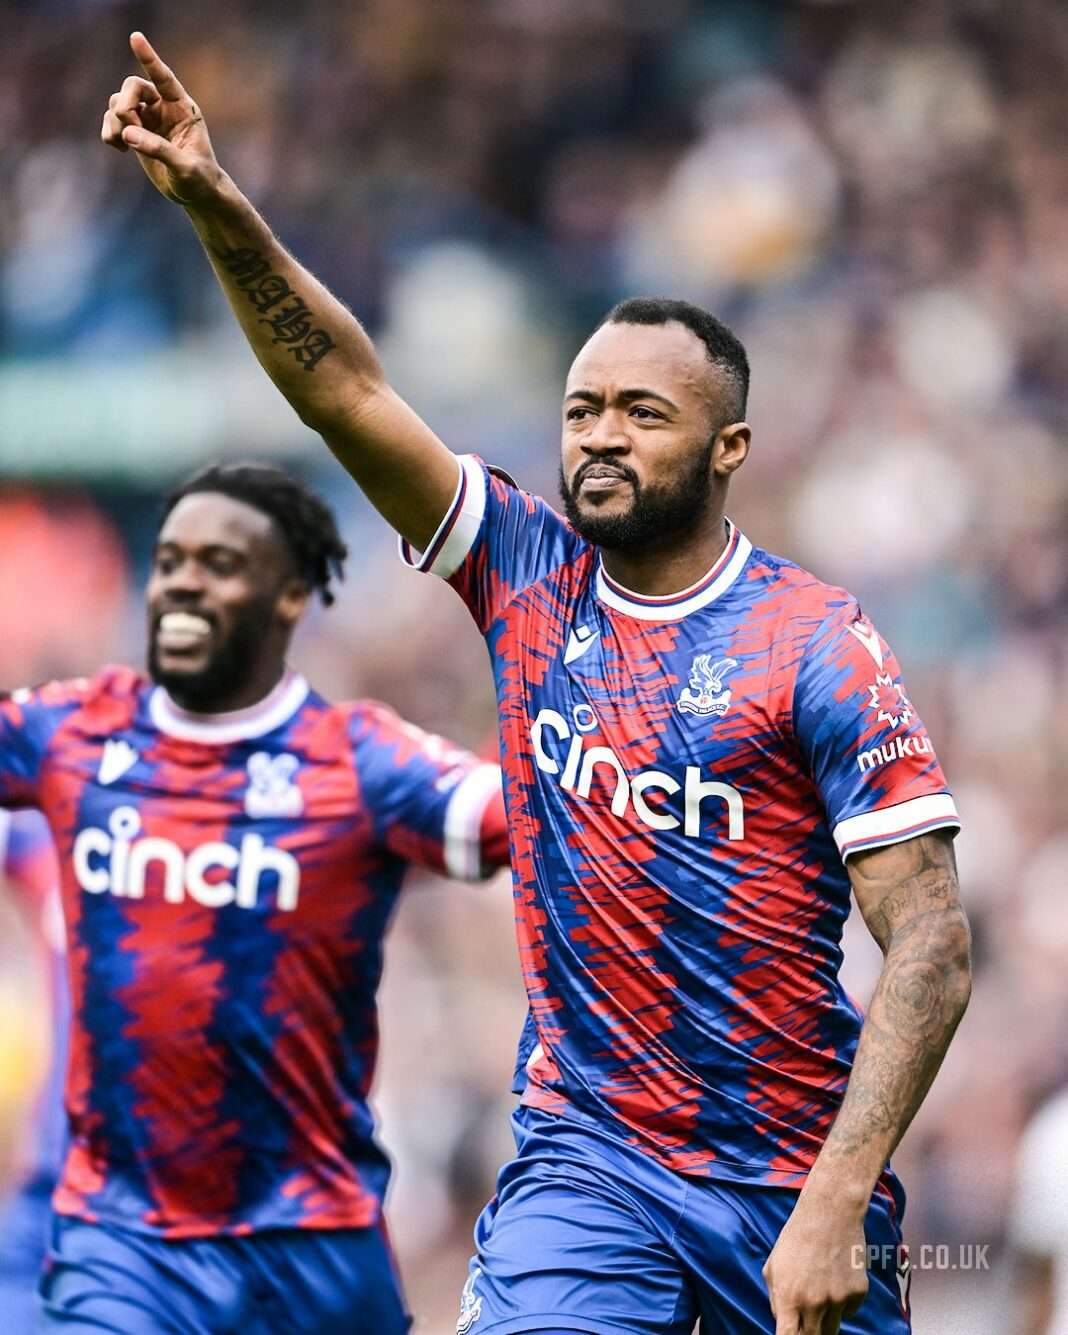 Ghana's Jordan Ayew scores twice for Crystal Palace FC in the EPL on Sunday